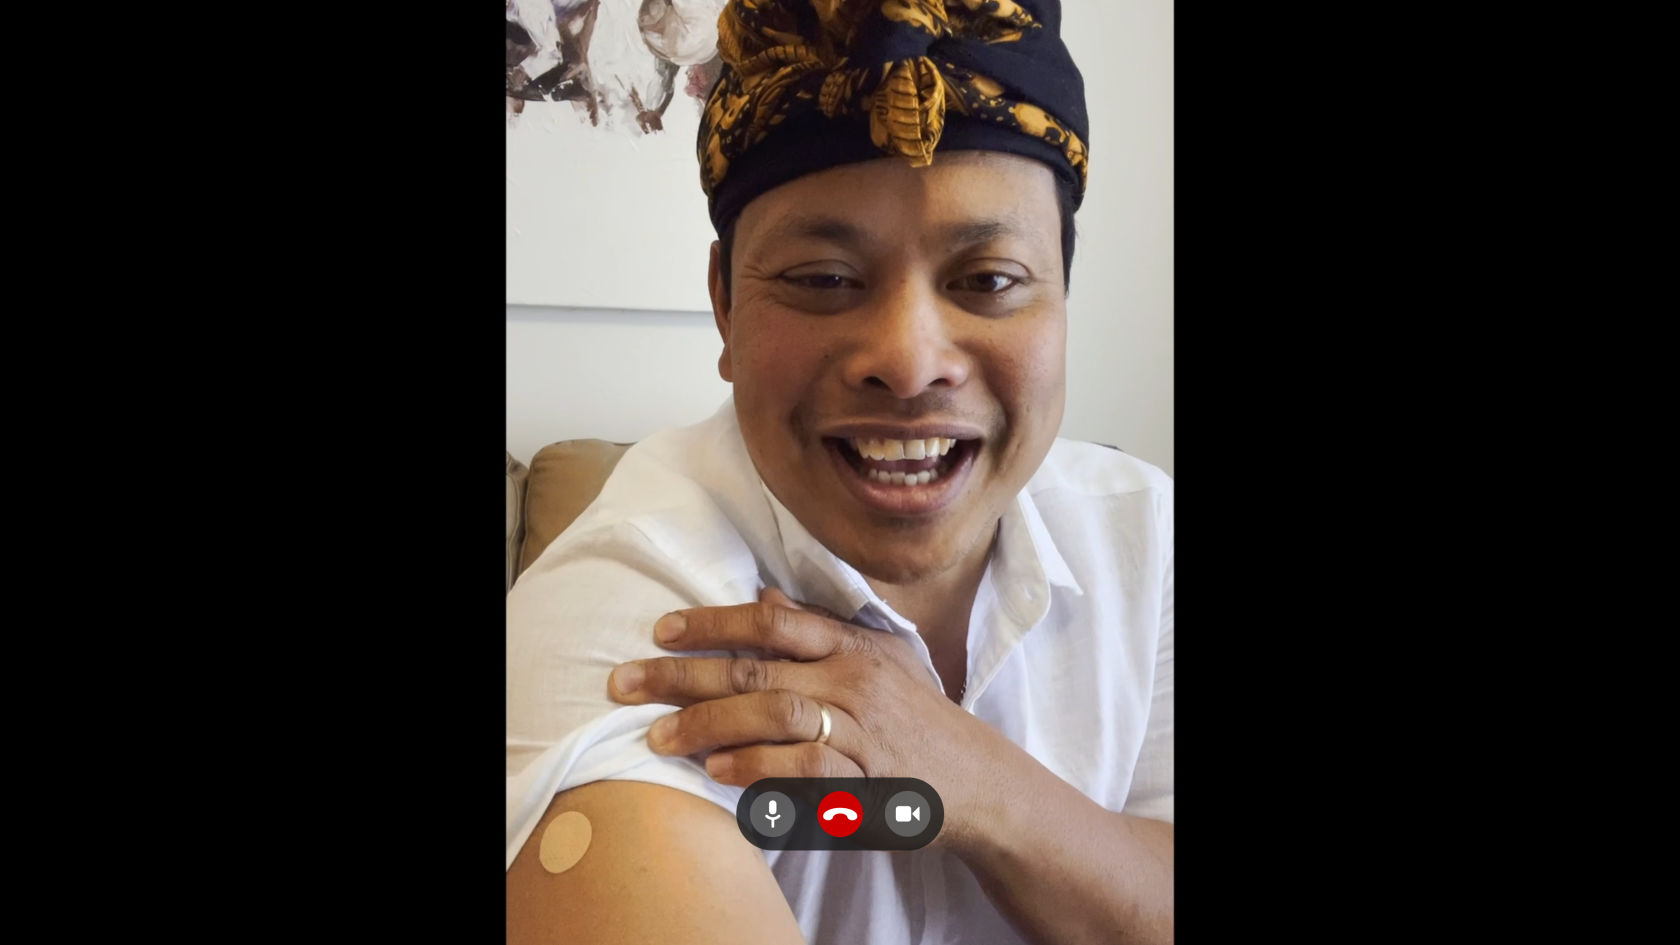 TV’s favourite couple Rhonda and Ketut reunite in new AAMI campaign to ‘vax up’ Australia